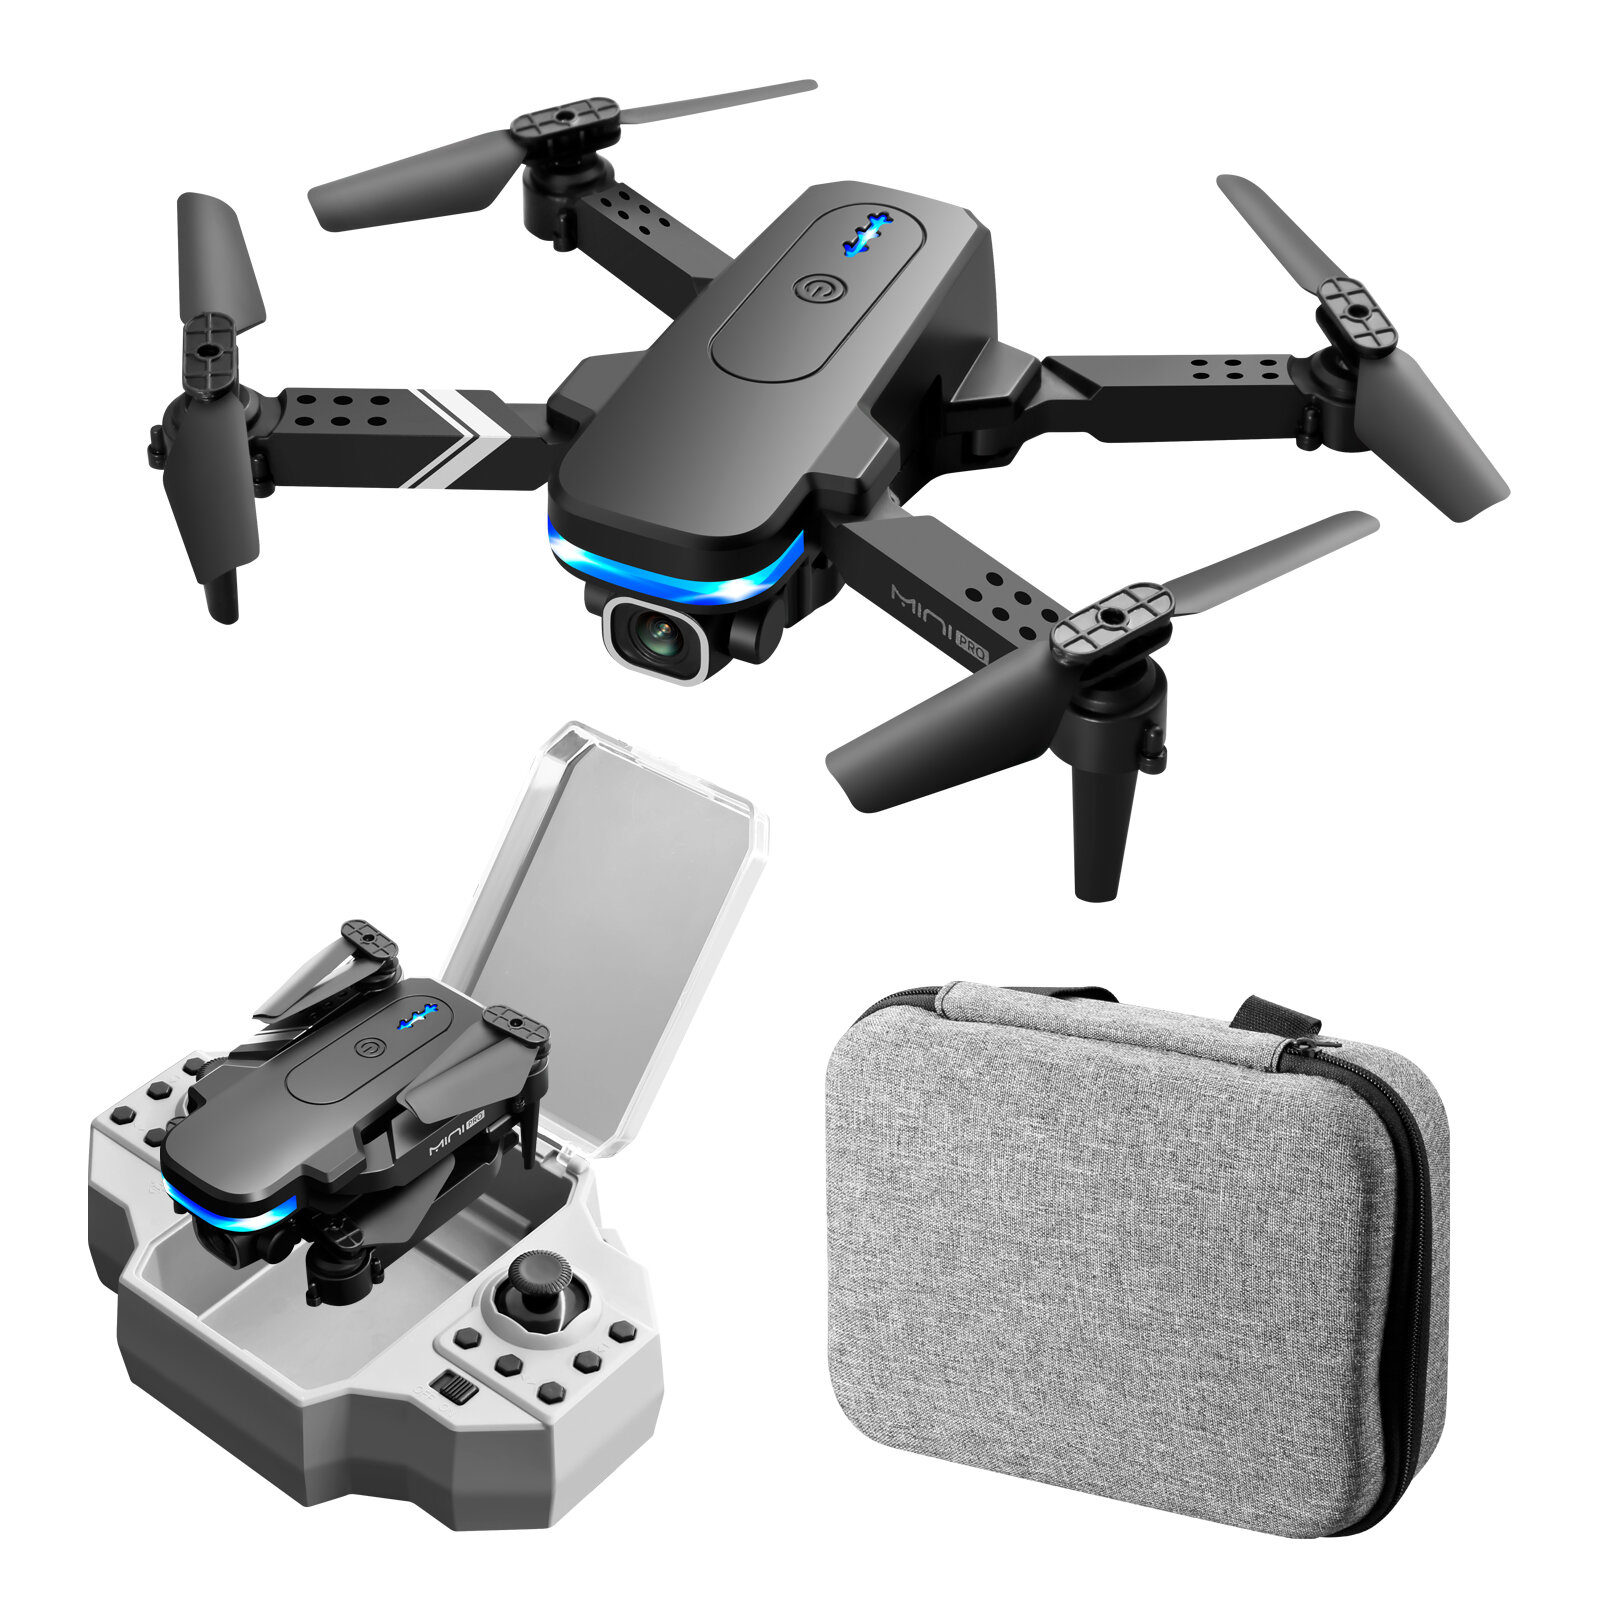 

KY910 Mini WiFi FPV with 4K HD Dual 50x ZOOM Camera Altitude Hold Mode Gravity Control Foldable RC Drone Quadcopter RTF